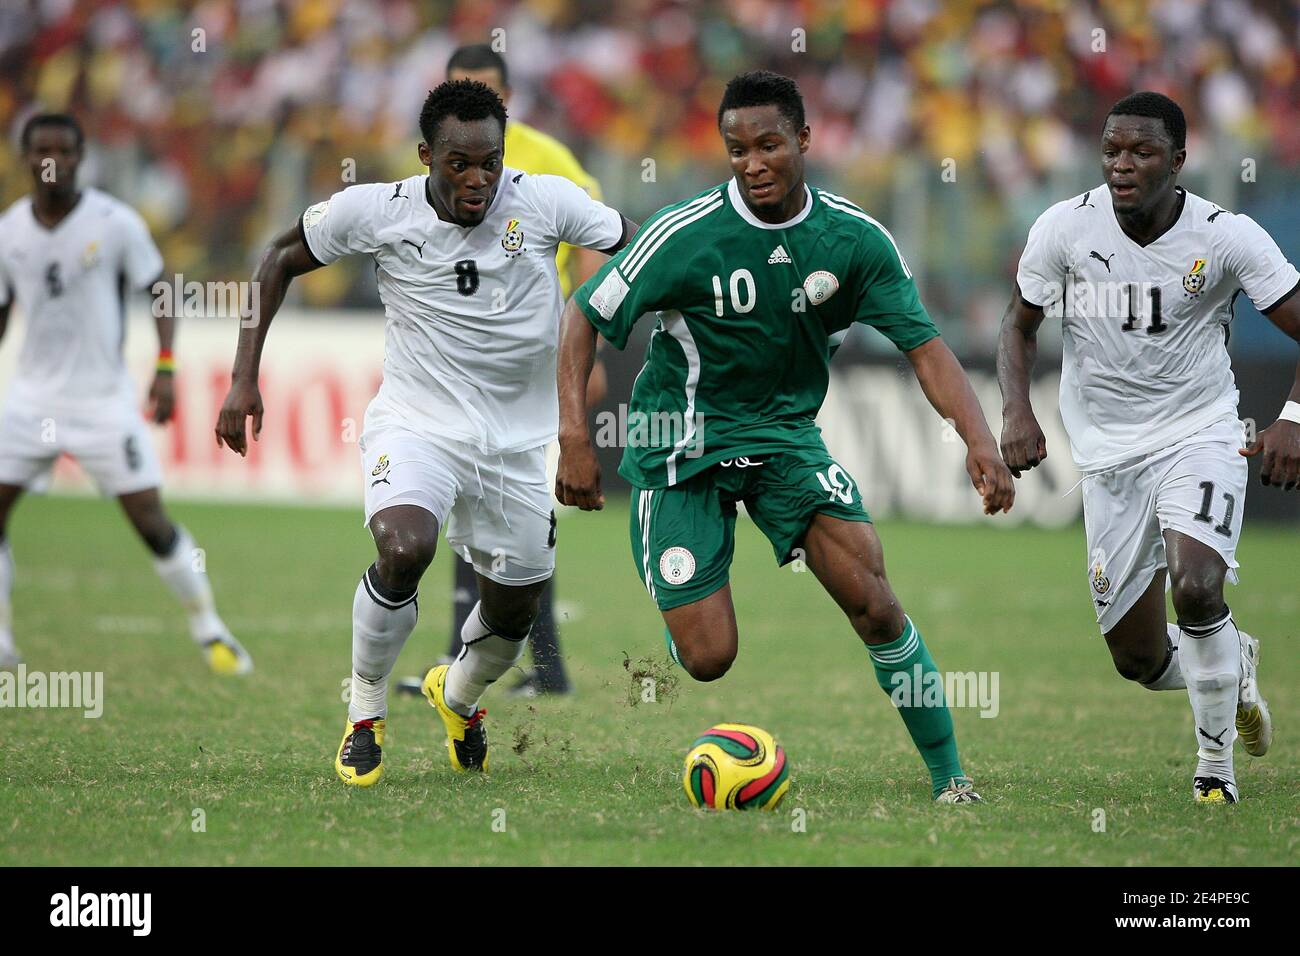 Nigeria's John Obi Mikel and Ghana Essien Michael battle for the ball during the African Cup of Nations, quarter finals, soccer match, Ghana vs Nigeria in Accra, Ghana on February 3, 2008. The Ghana won 2-1. Photo by Steeve McMay/Cameleon/ABACAPRESS.COM Stock Photo